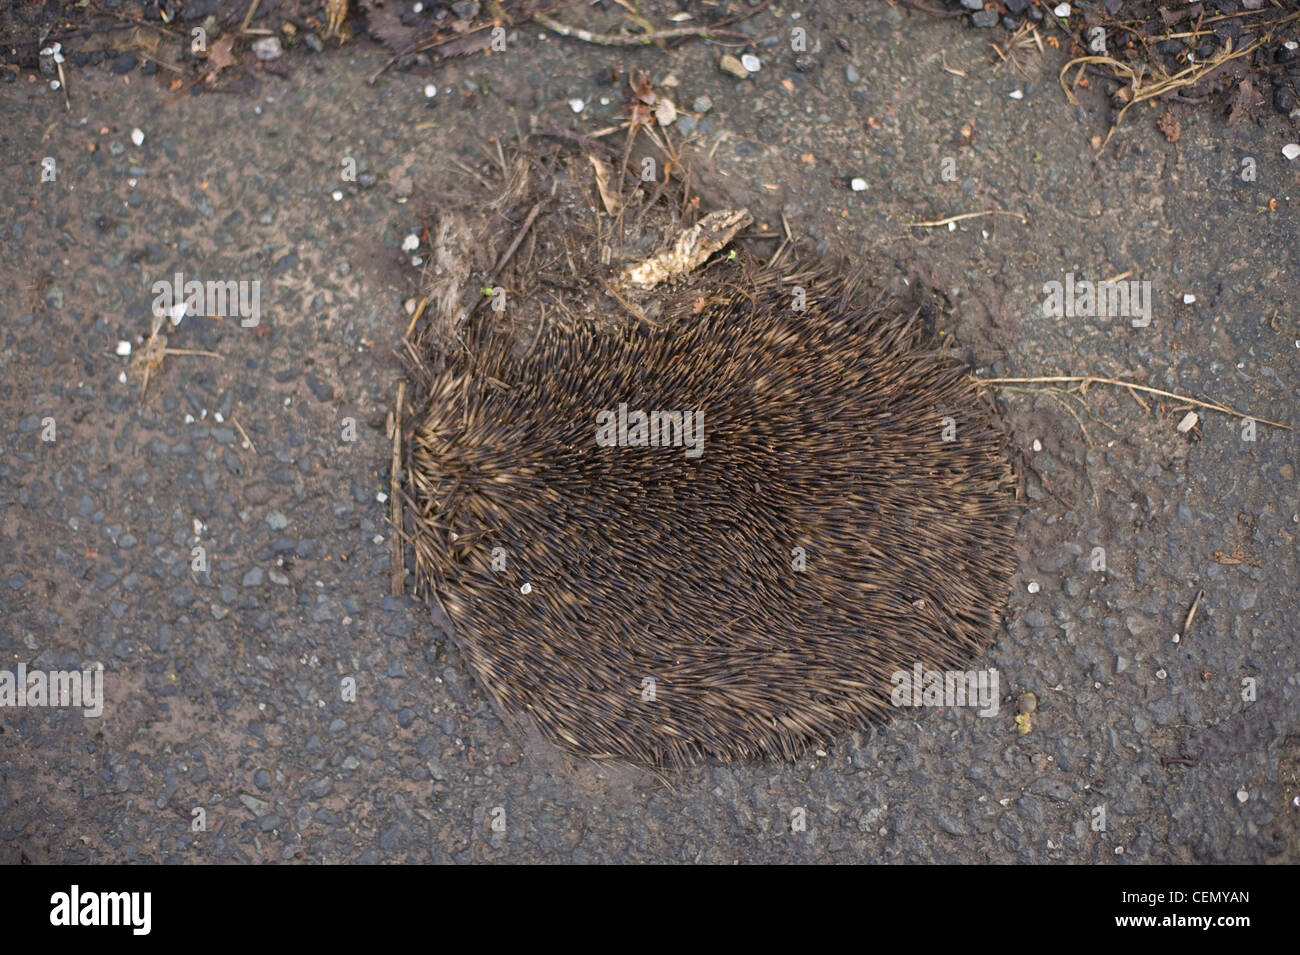 Flat dead hedgehog on roadside in picturesque English village of Weobley Herefordshire England UK Stock Photo